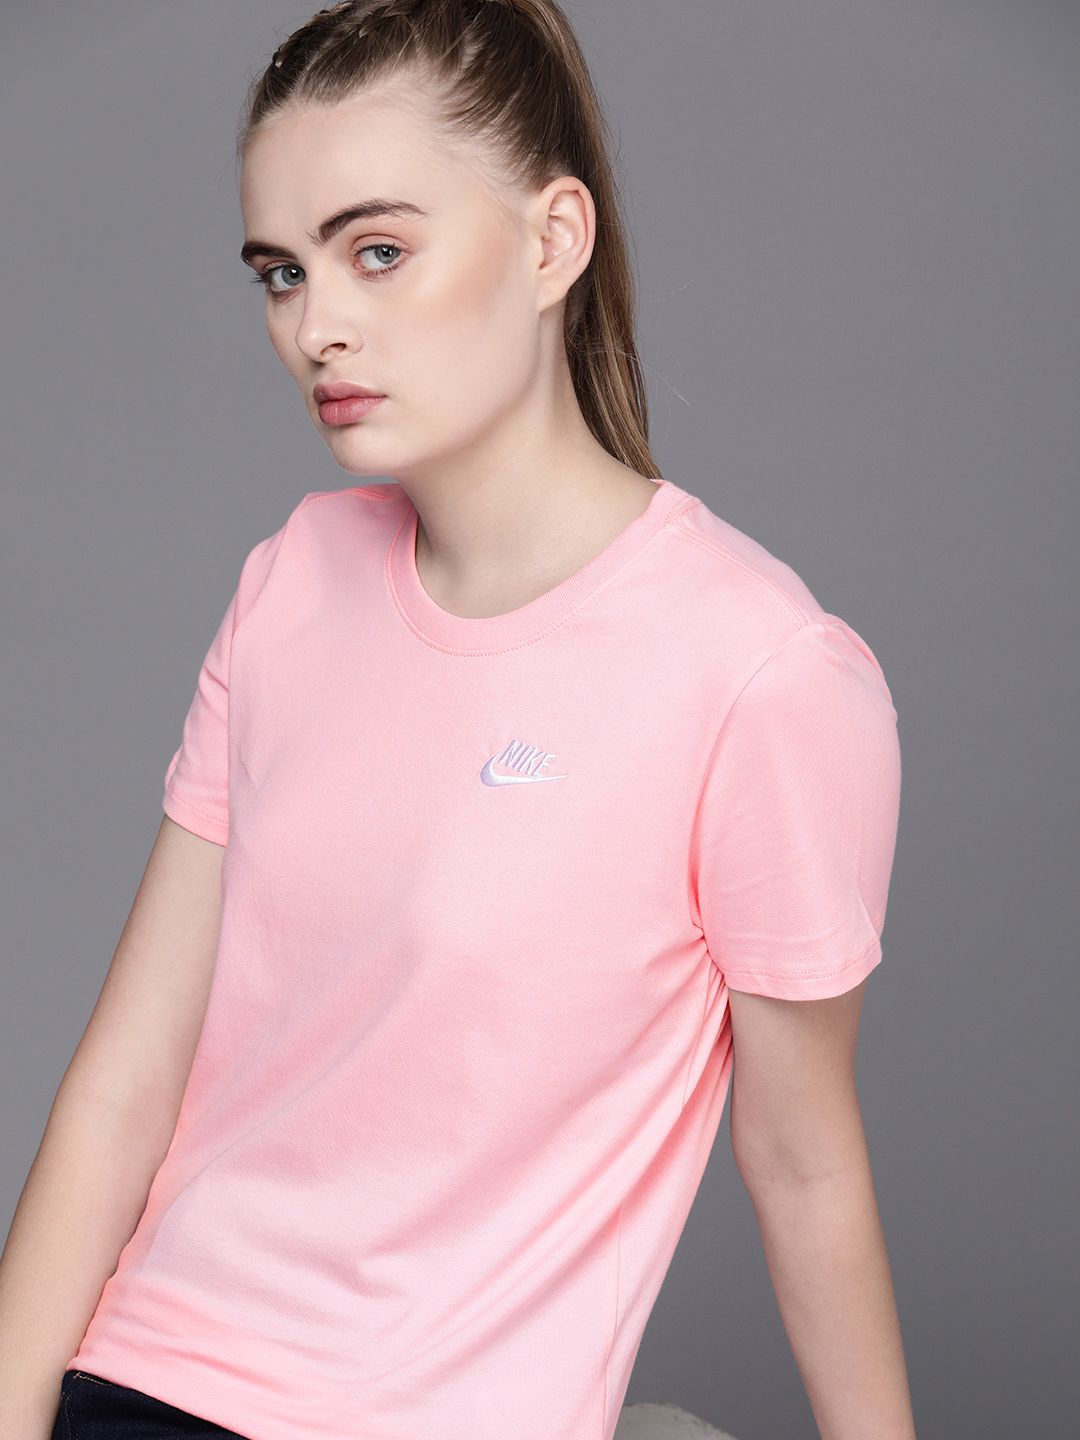 Nike Women Solid Pure Cotton Round Neck T-shirt Price in India